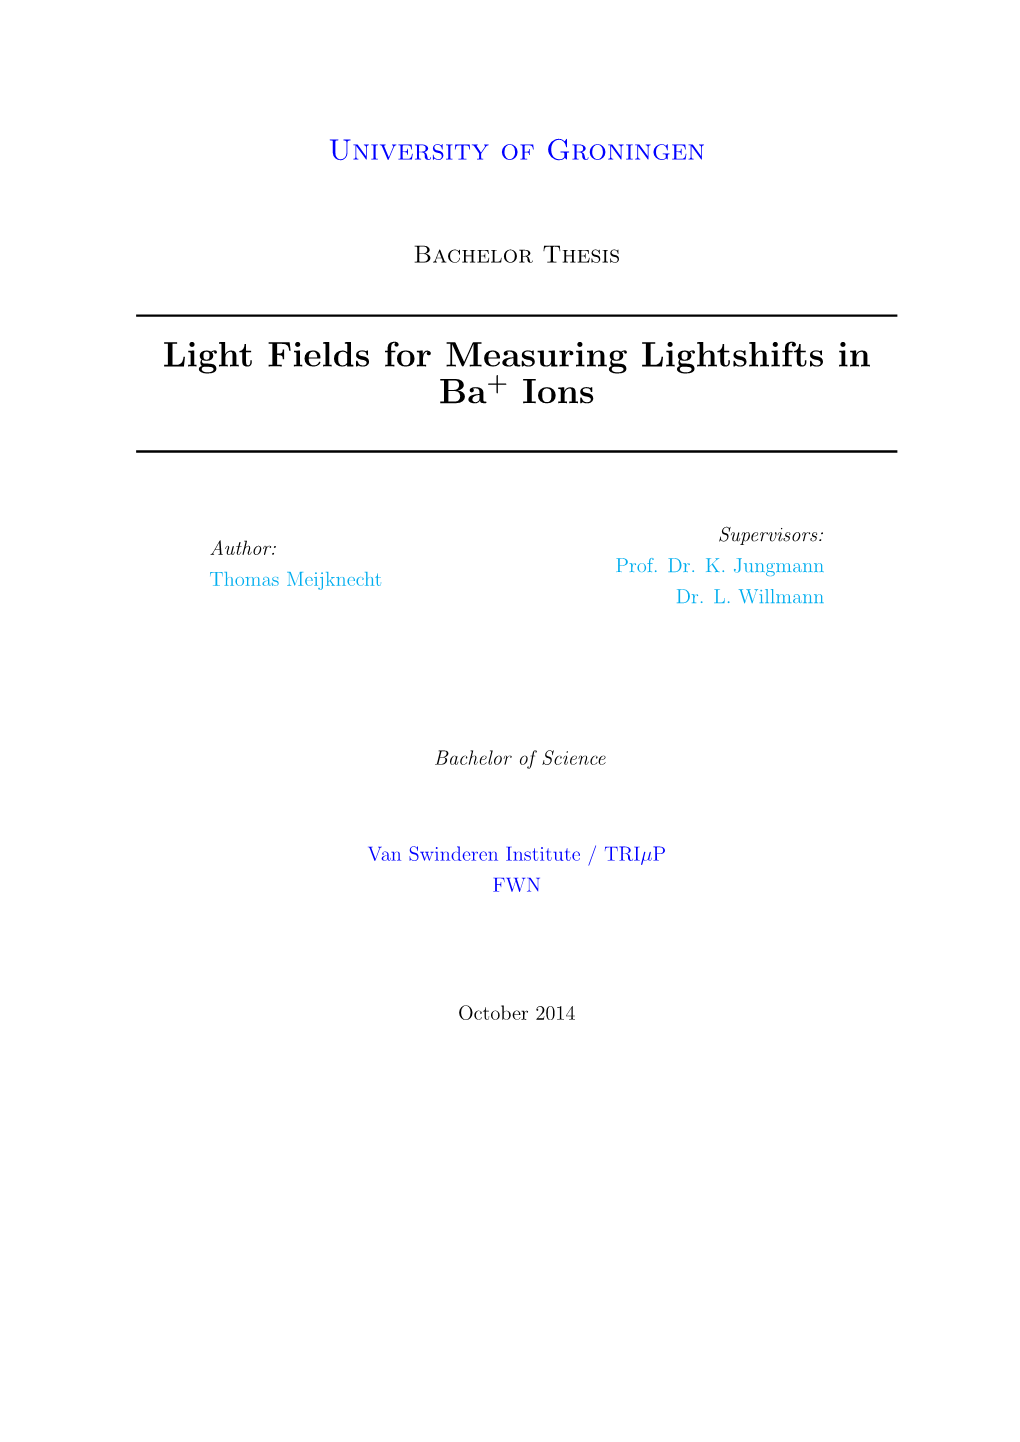 Light Fields for Measuring Lightshifts in I Ions